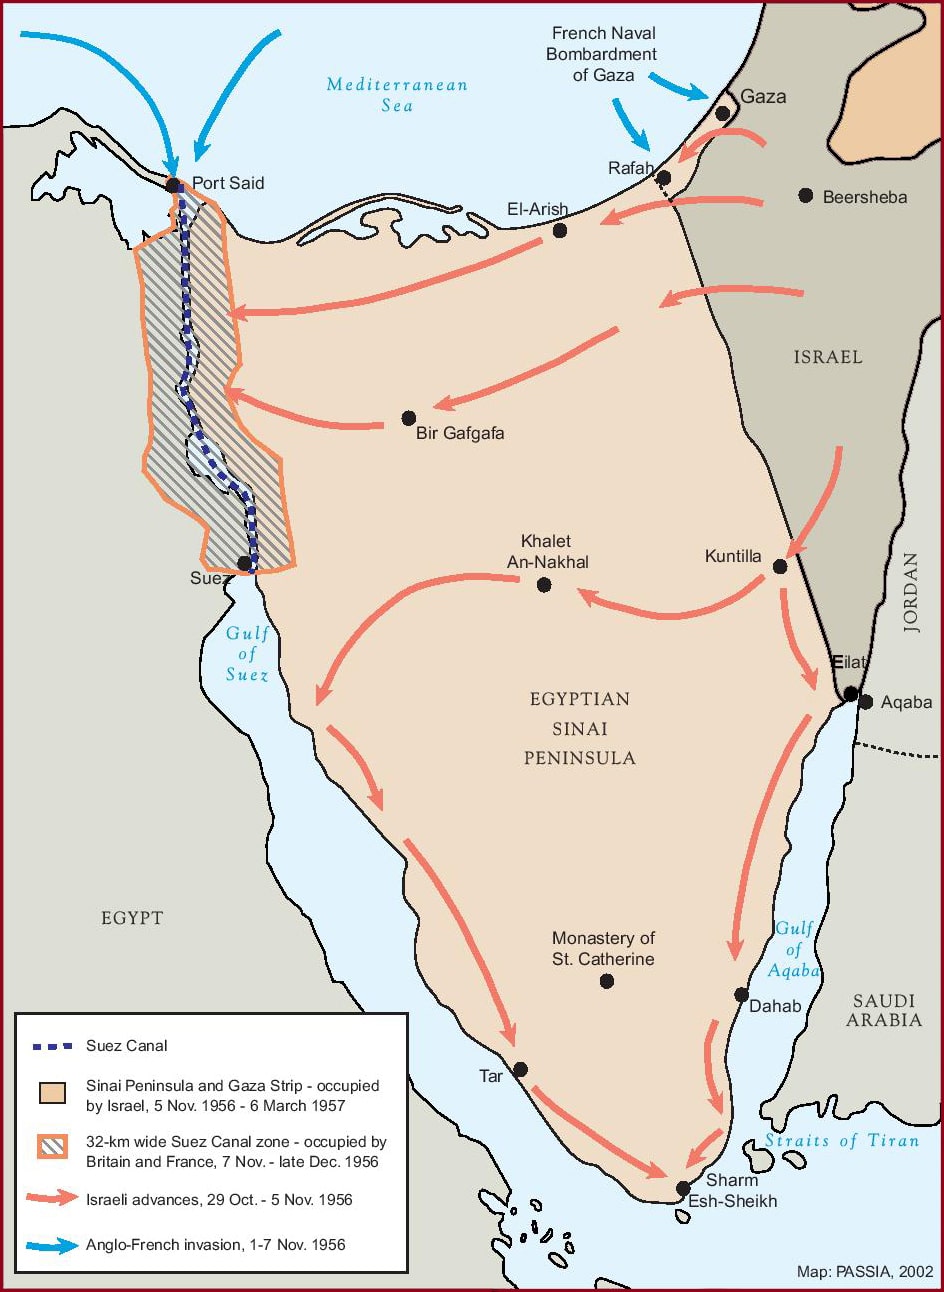 Map showing the details of the 1956 tripartite attack on Egypt